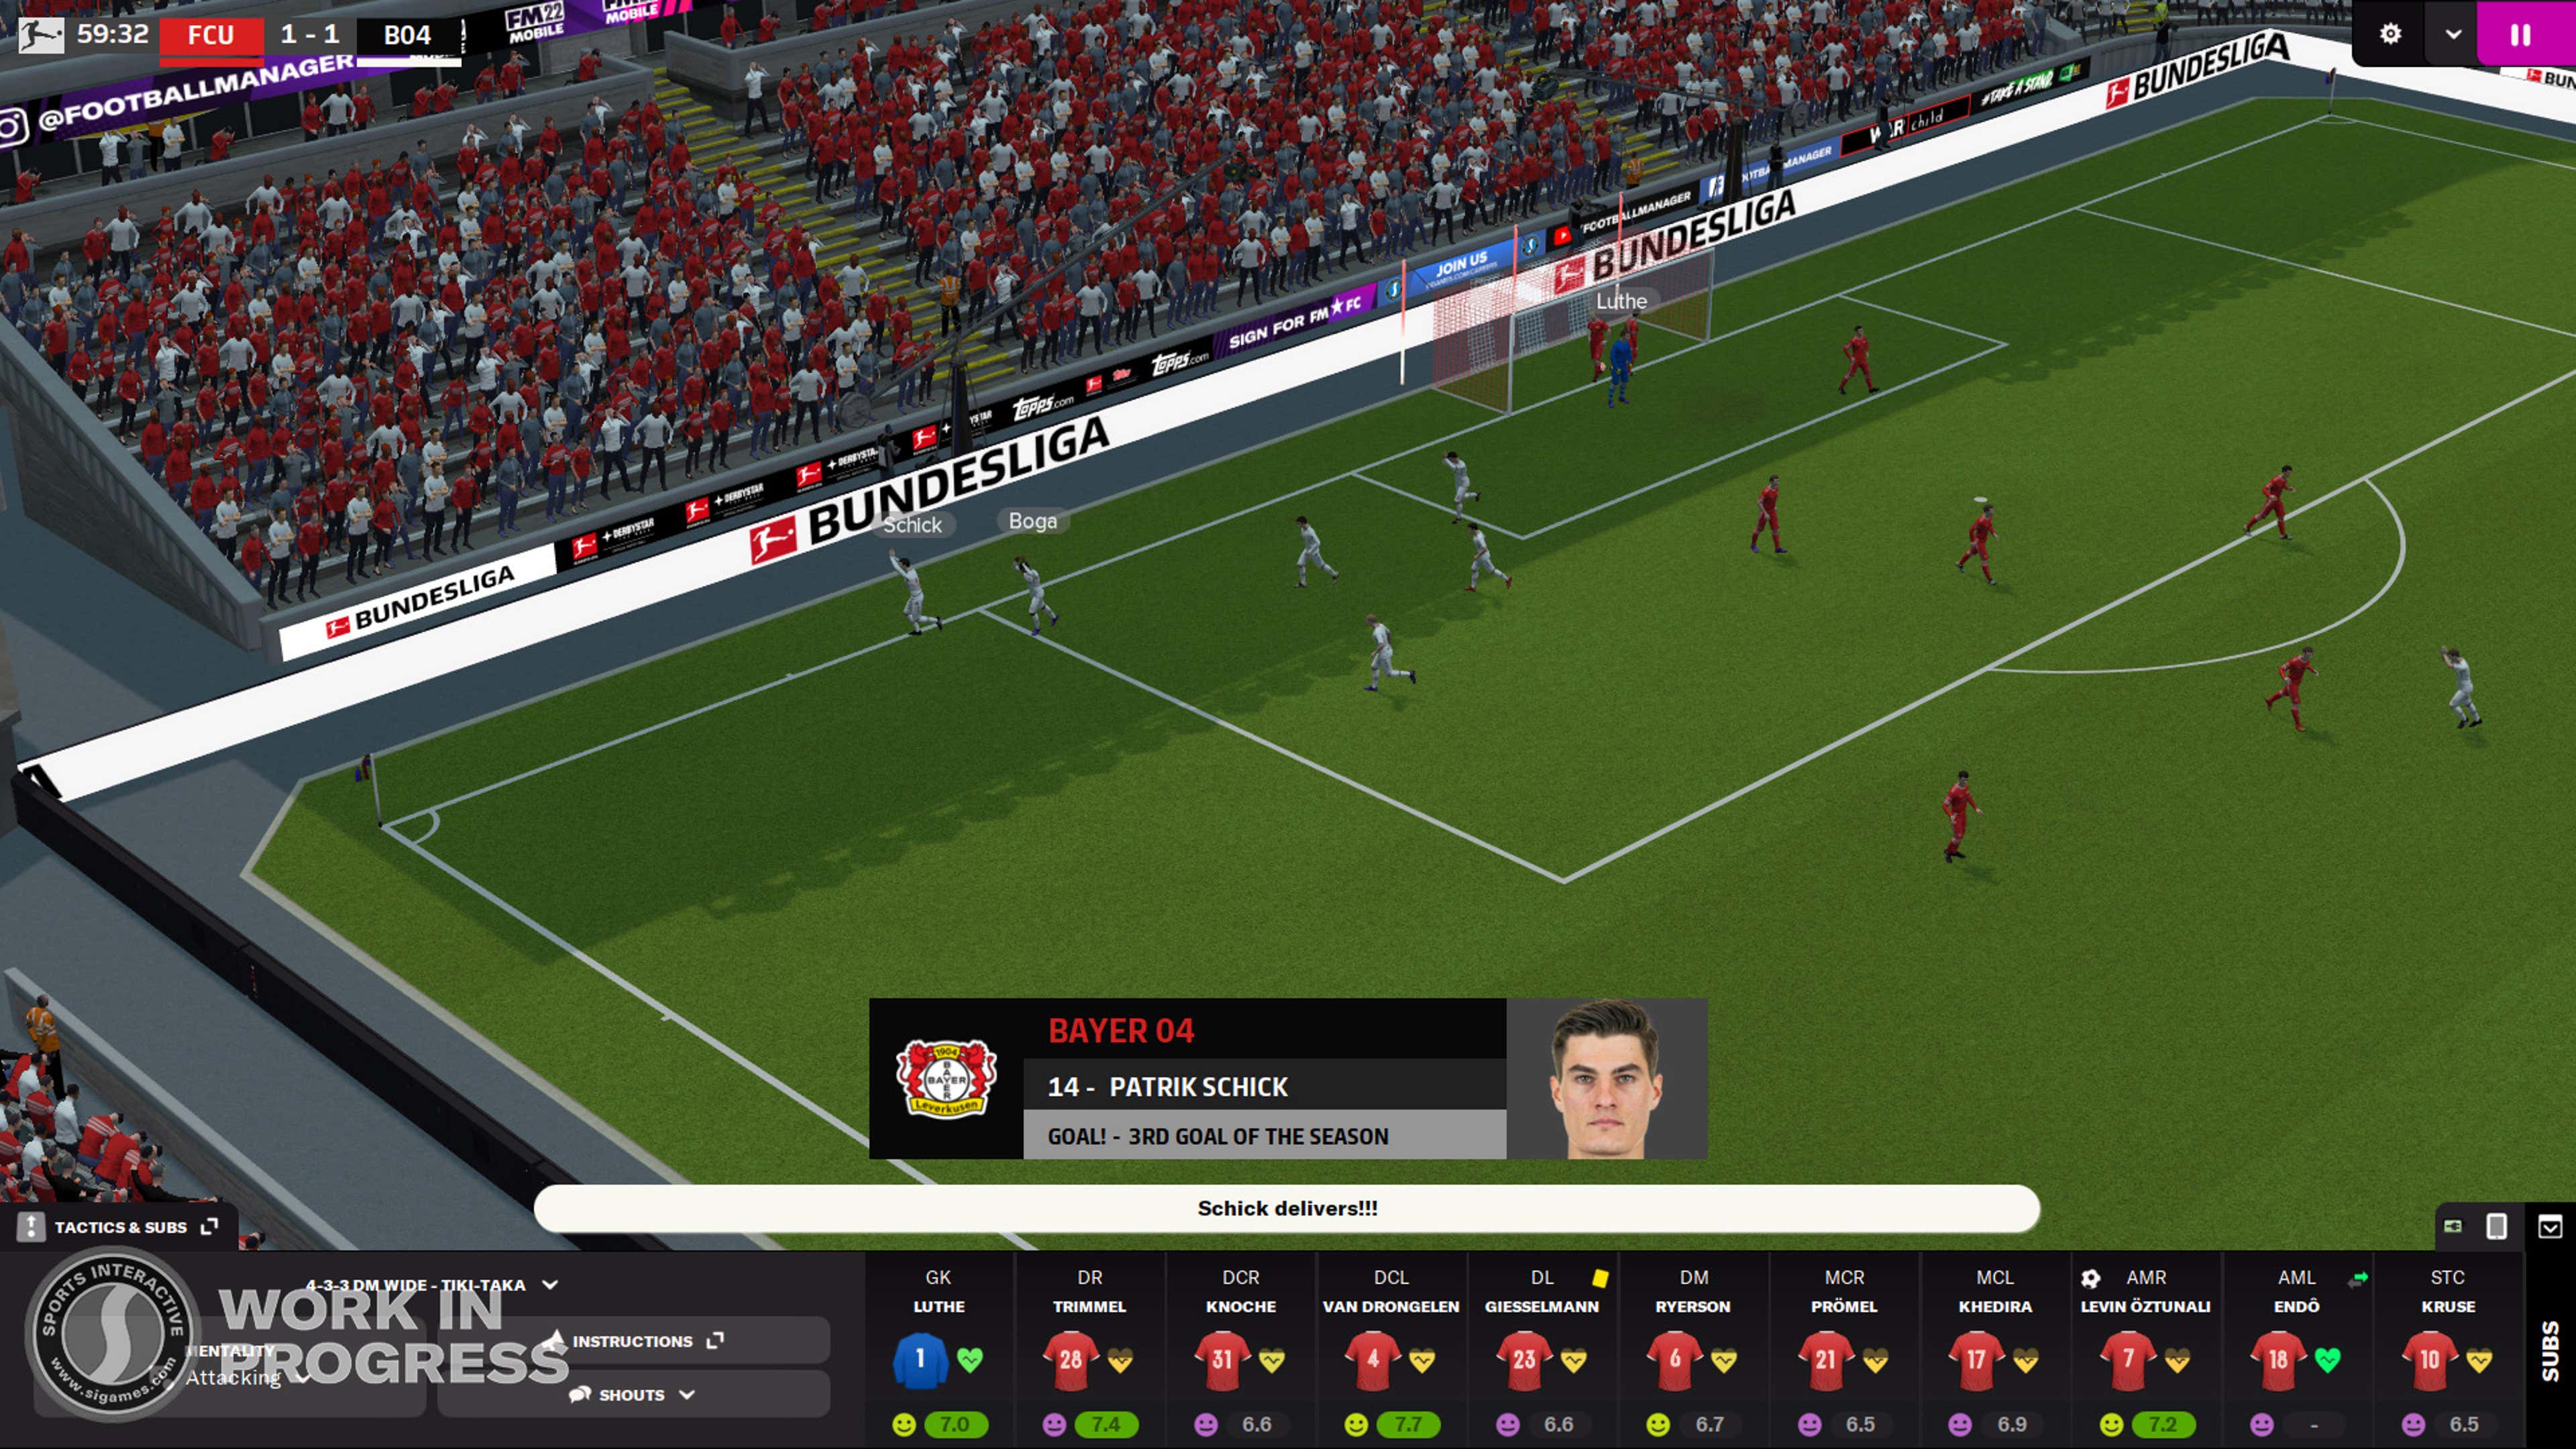 Embed Football Manager 2022 match engine